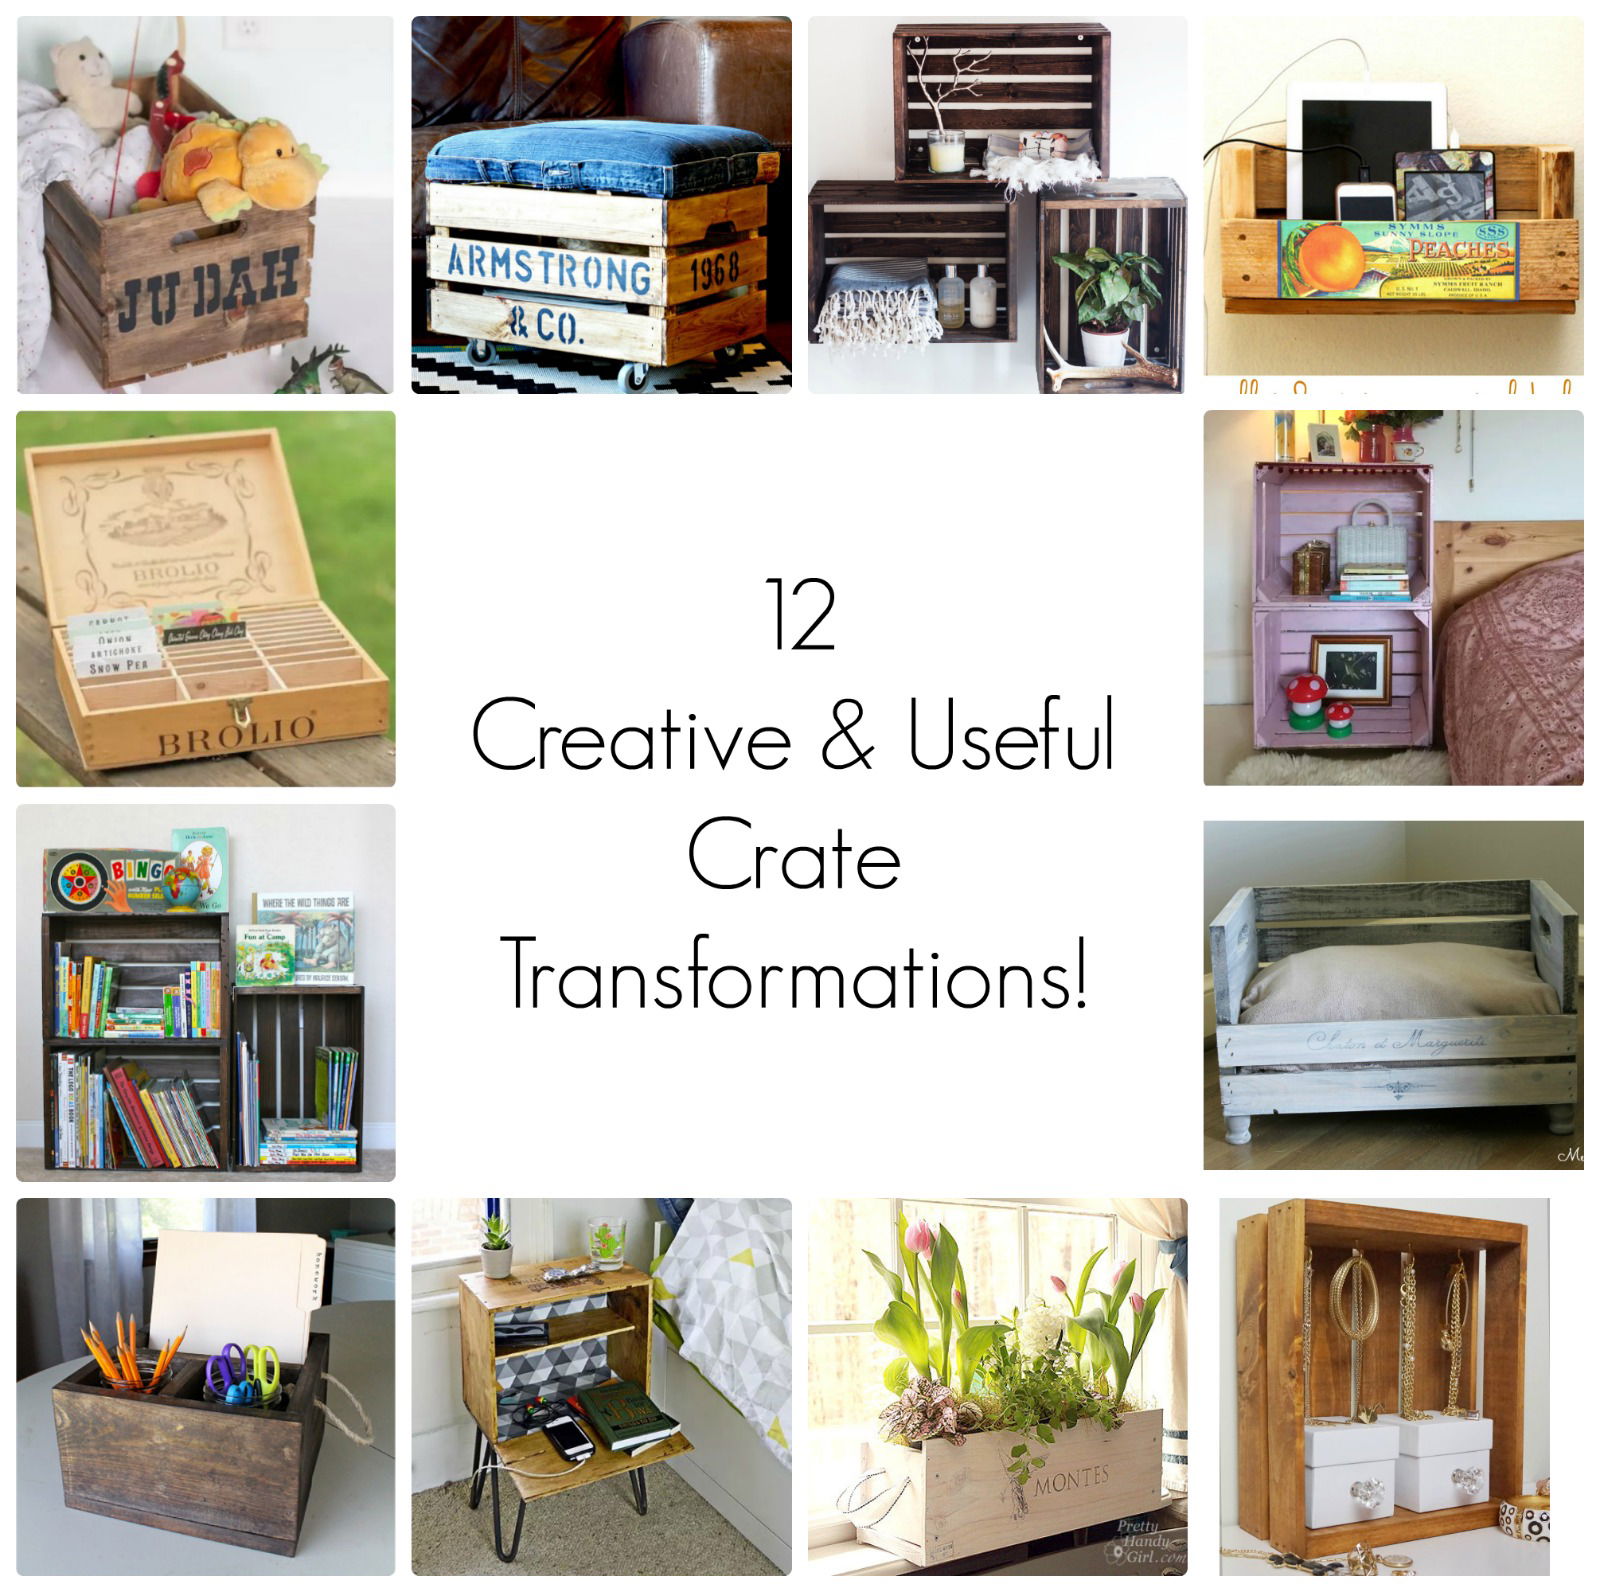 crate projects - 12 Awesome Crate Recycling Projects